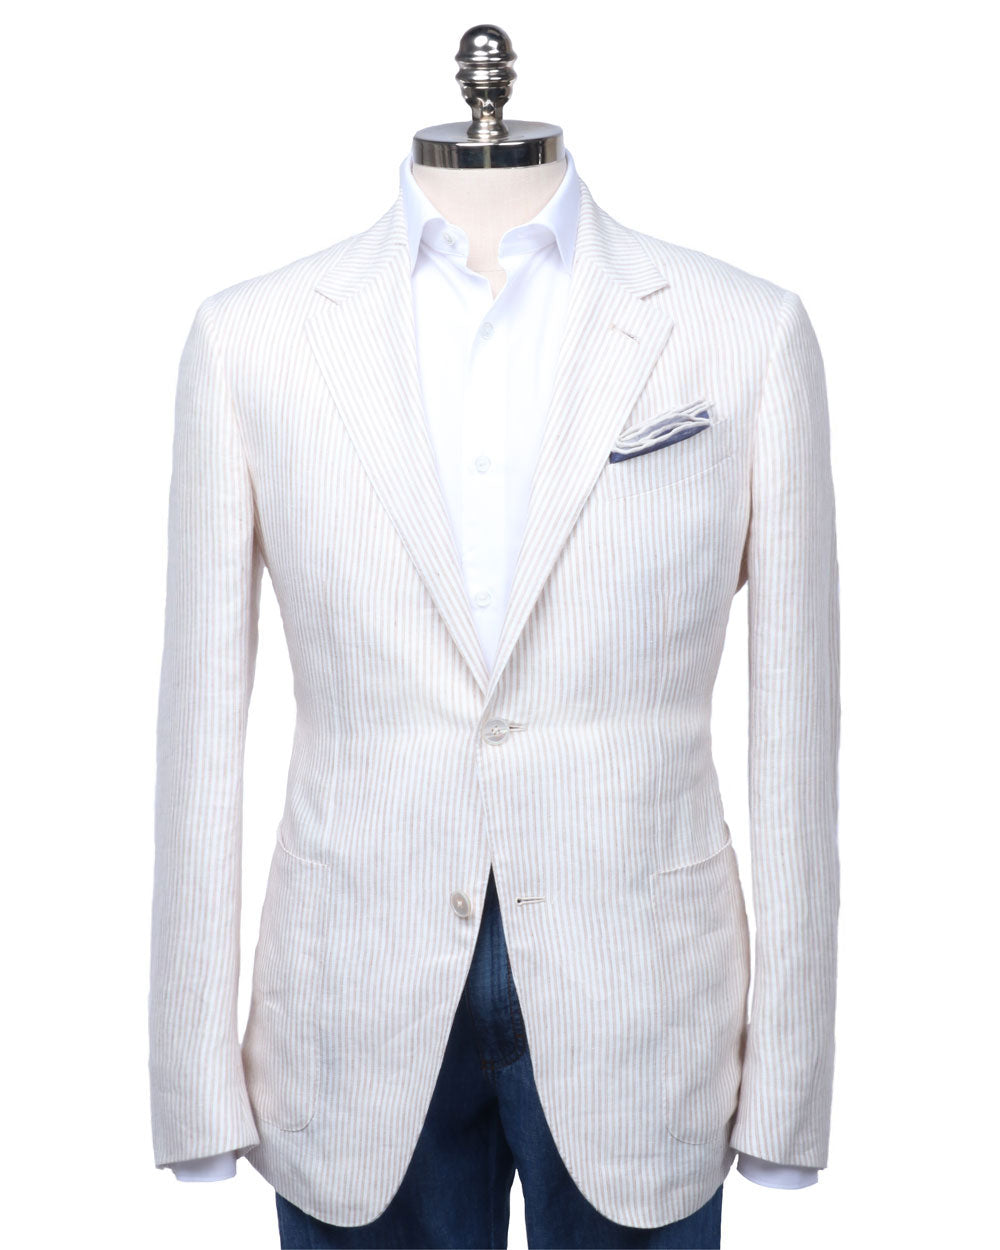 Beige and White Pinstripe Sportcoat